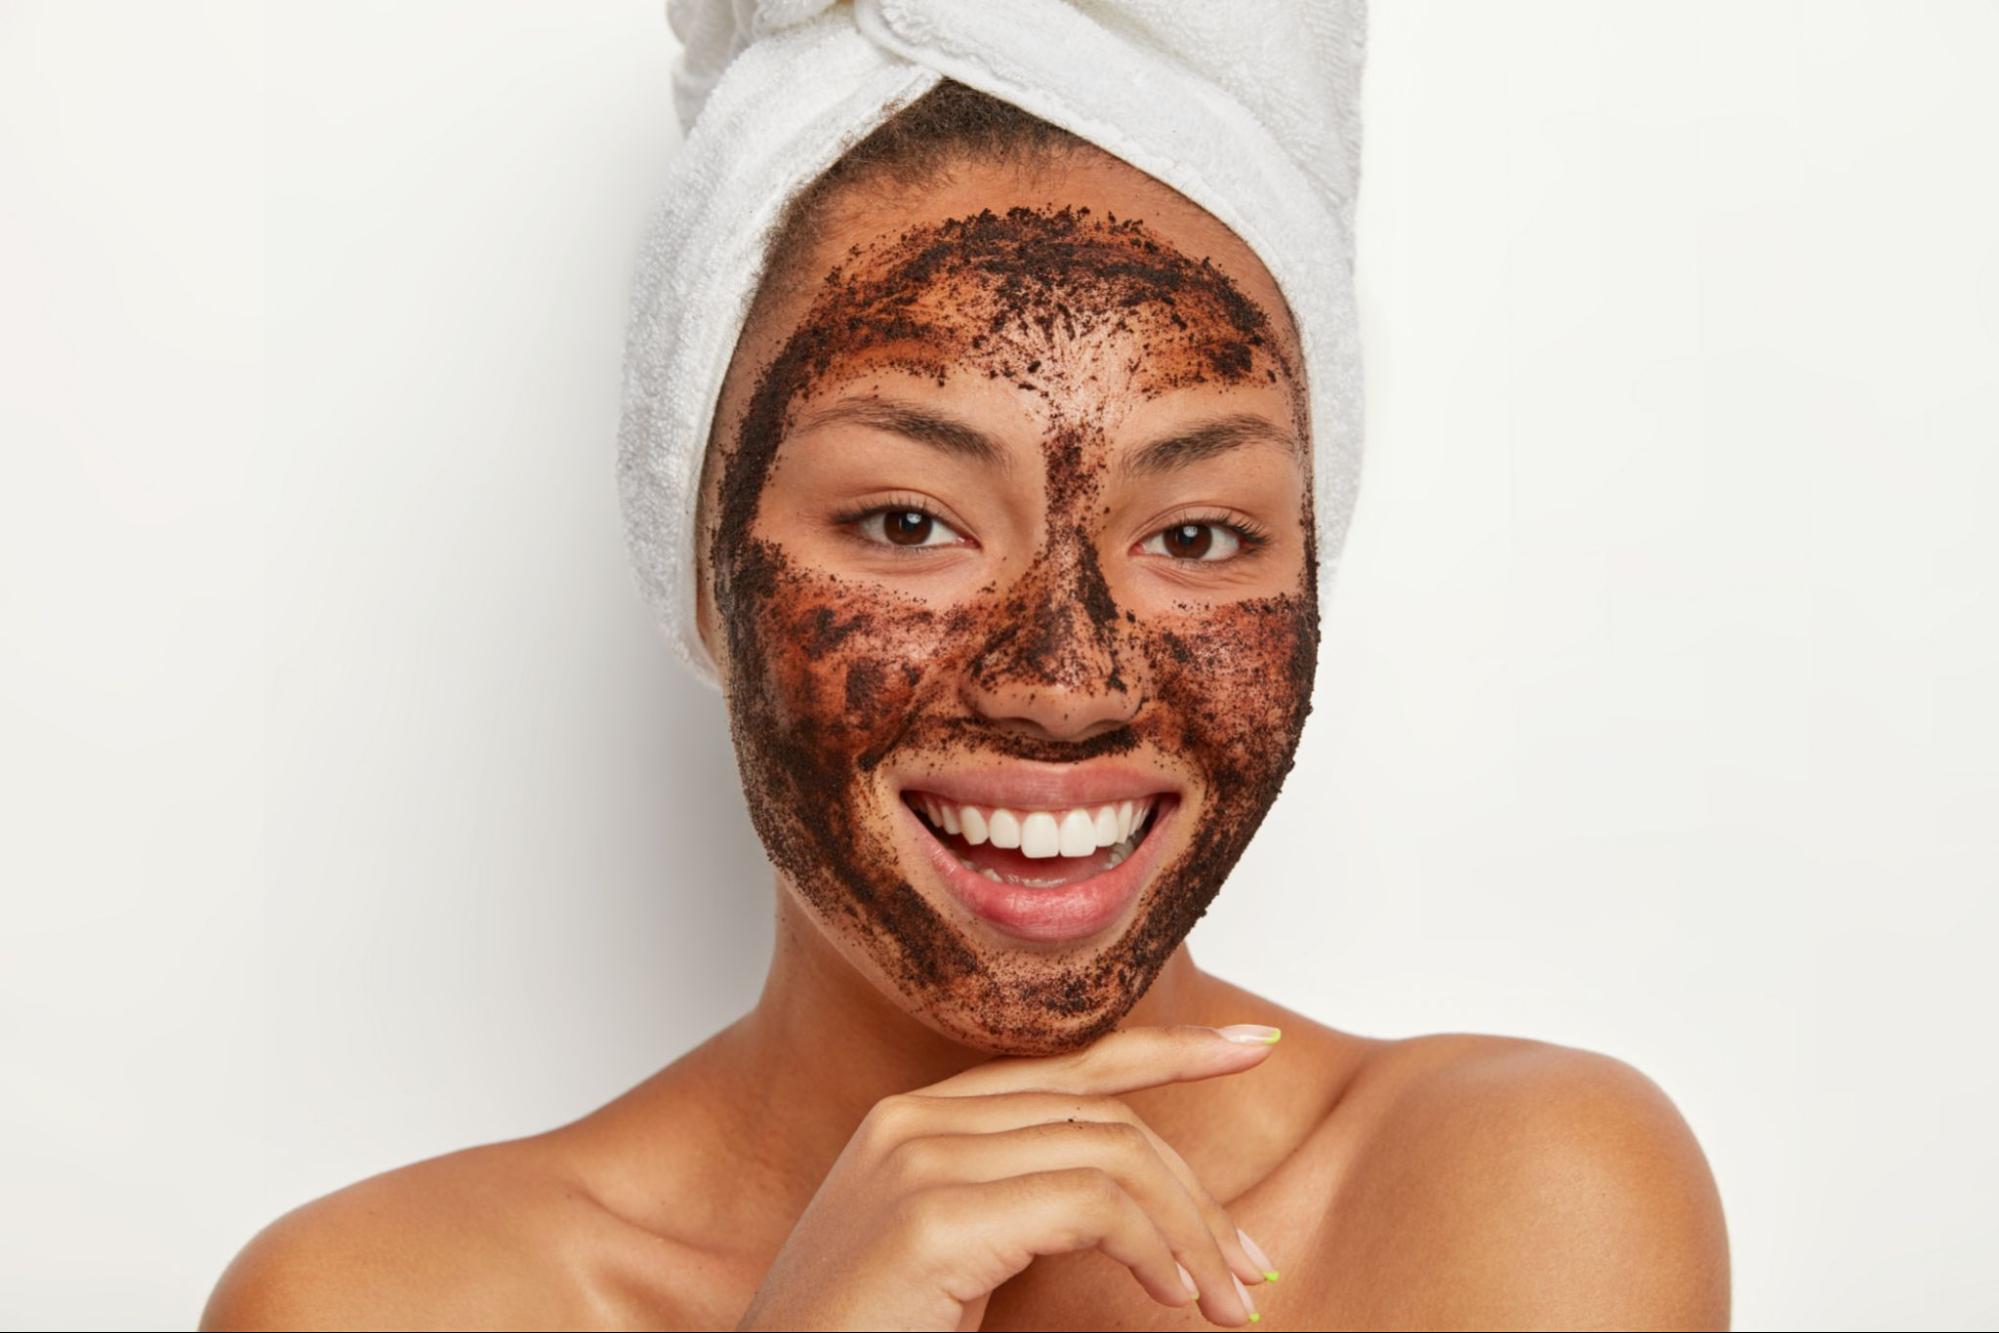 A woman with an exfoliation mask on her face to represent one of the Primary Types of Exfoliation